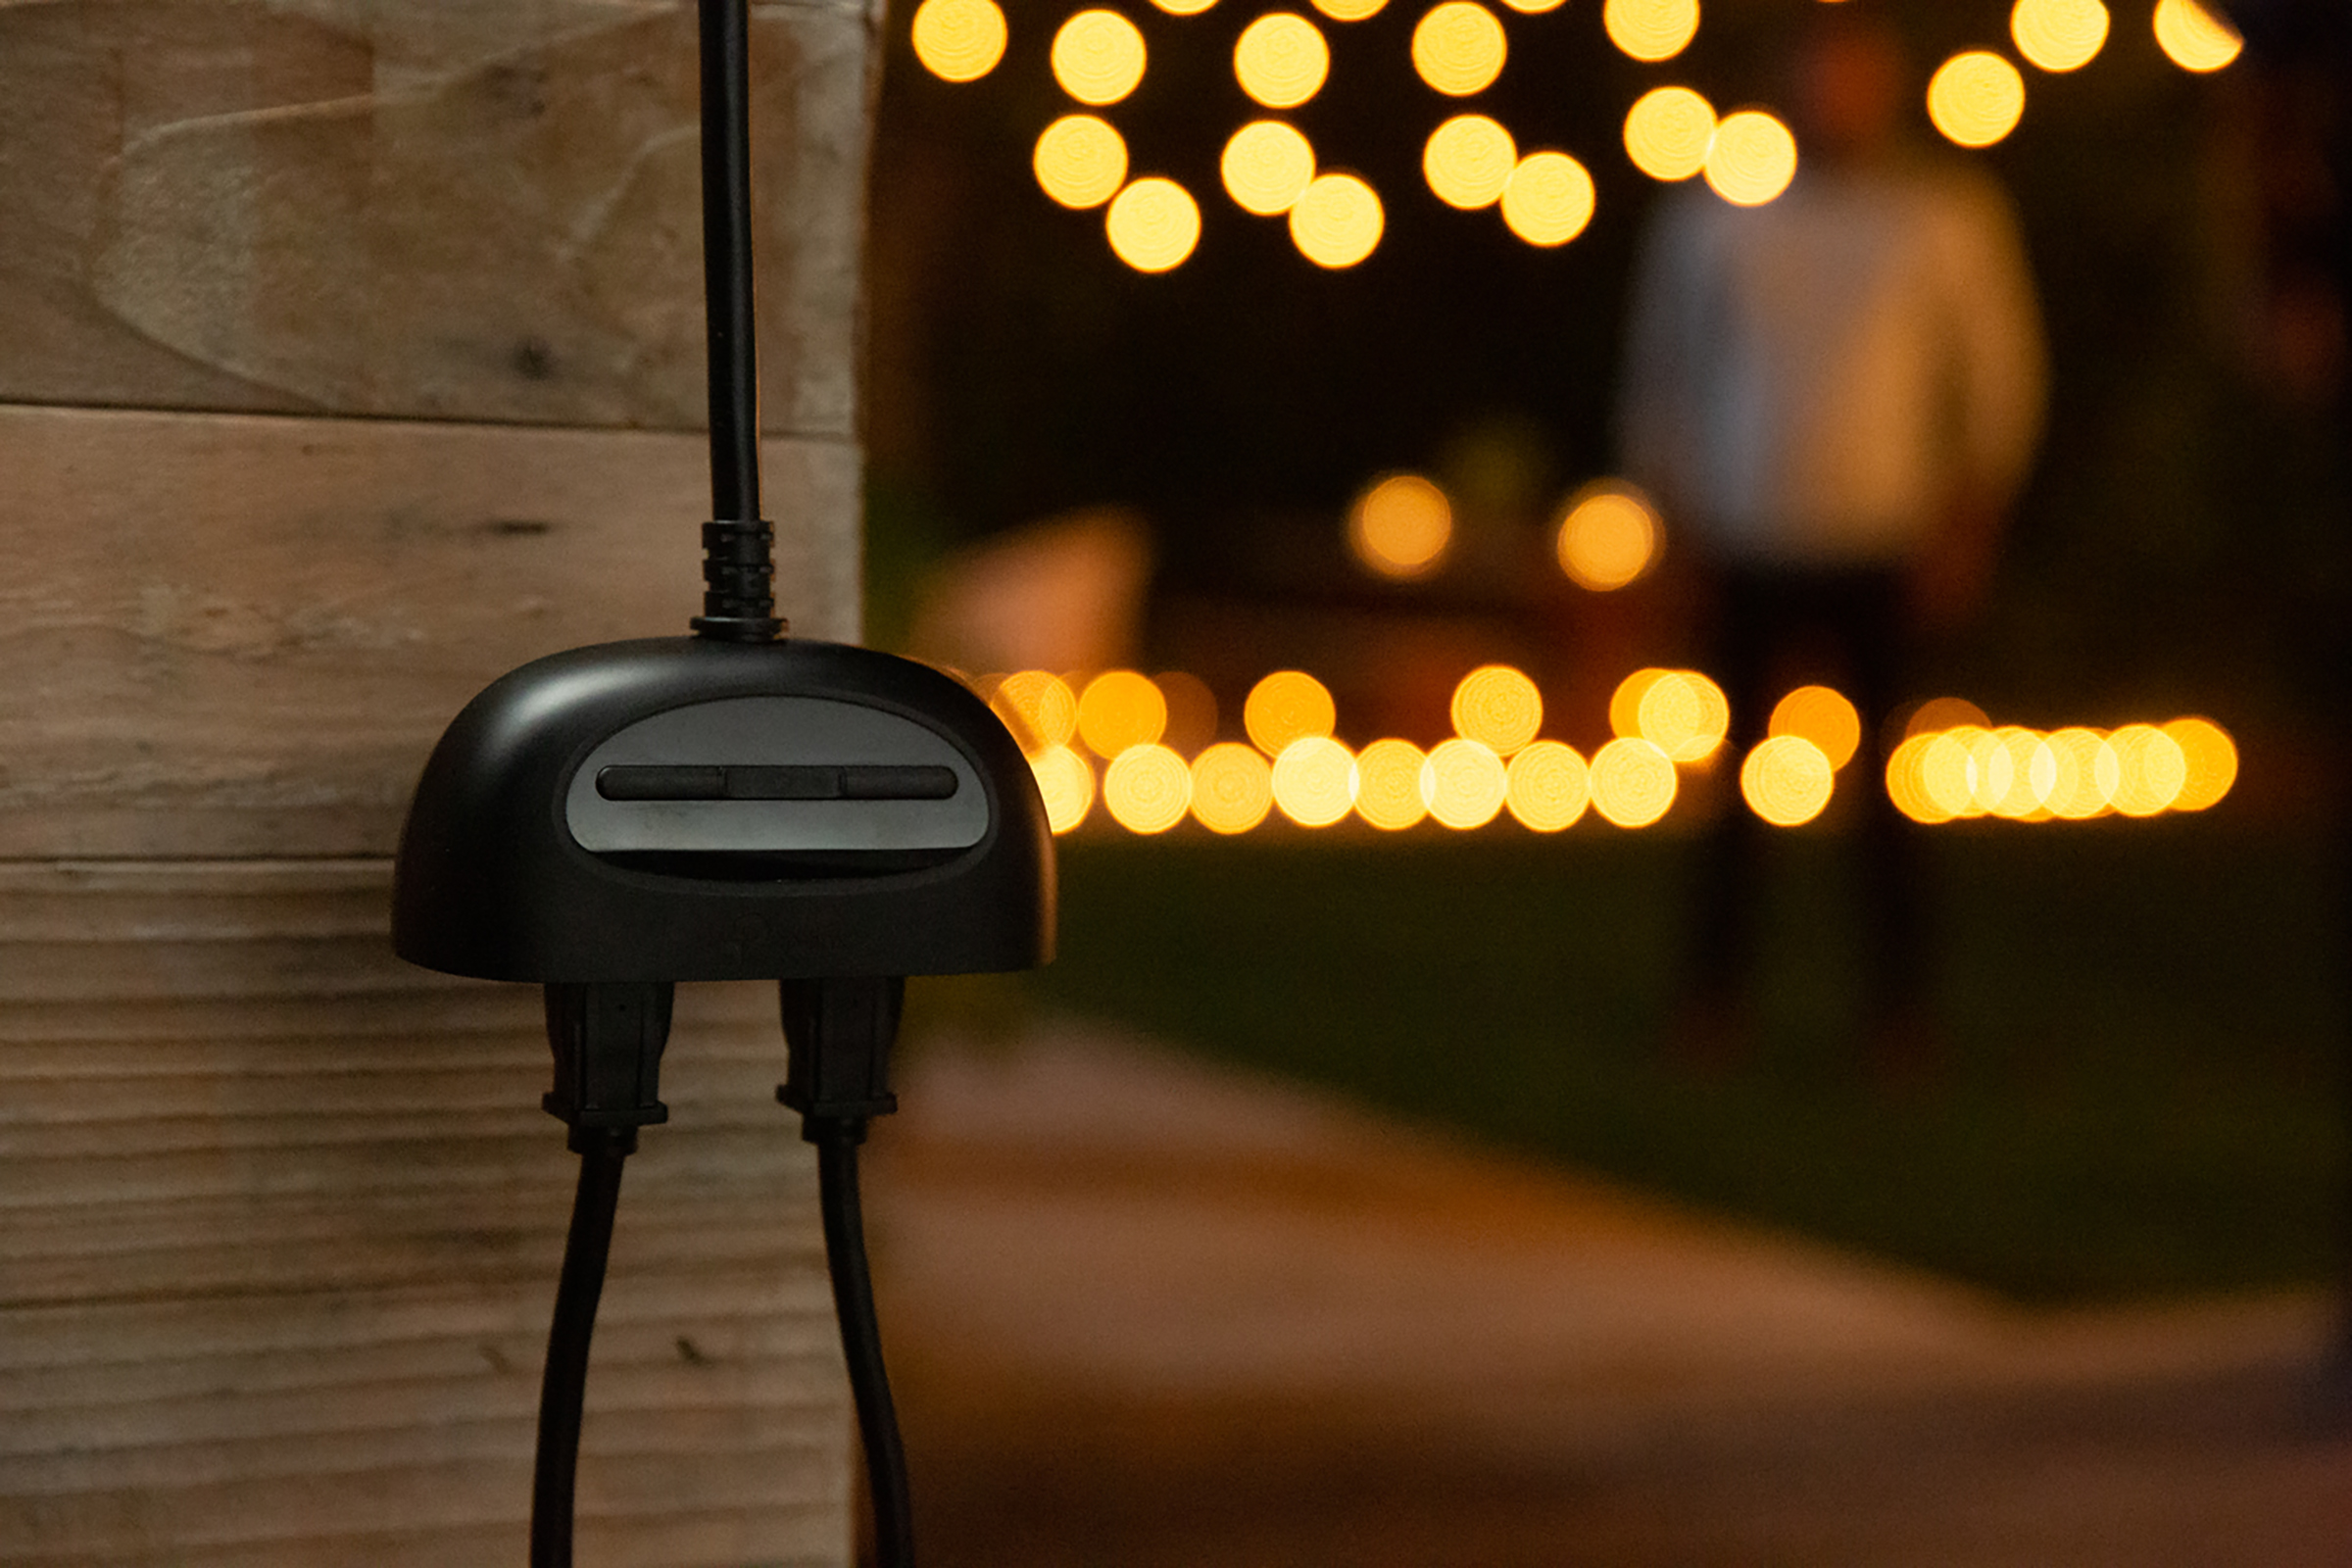 Leviton's new outdoor smart plug is the first to work with Matter